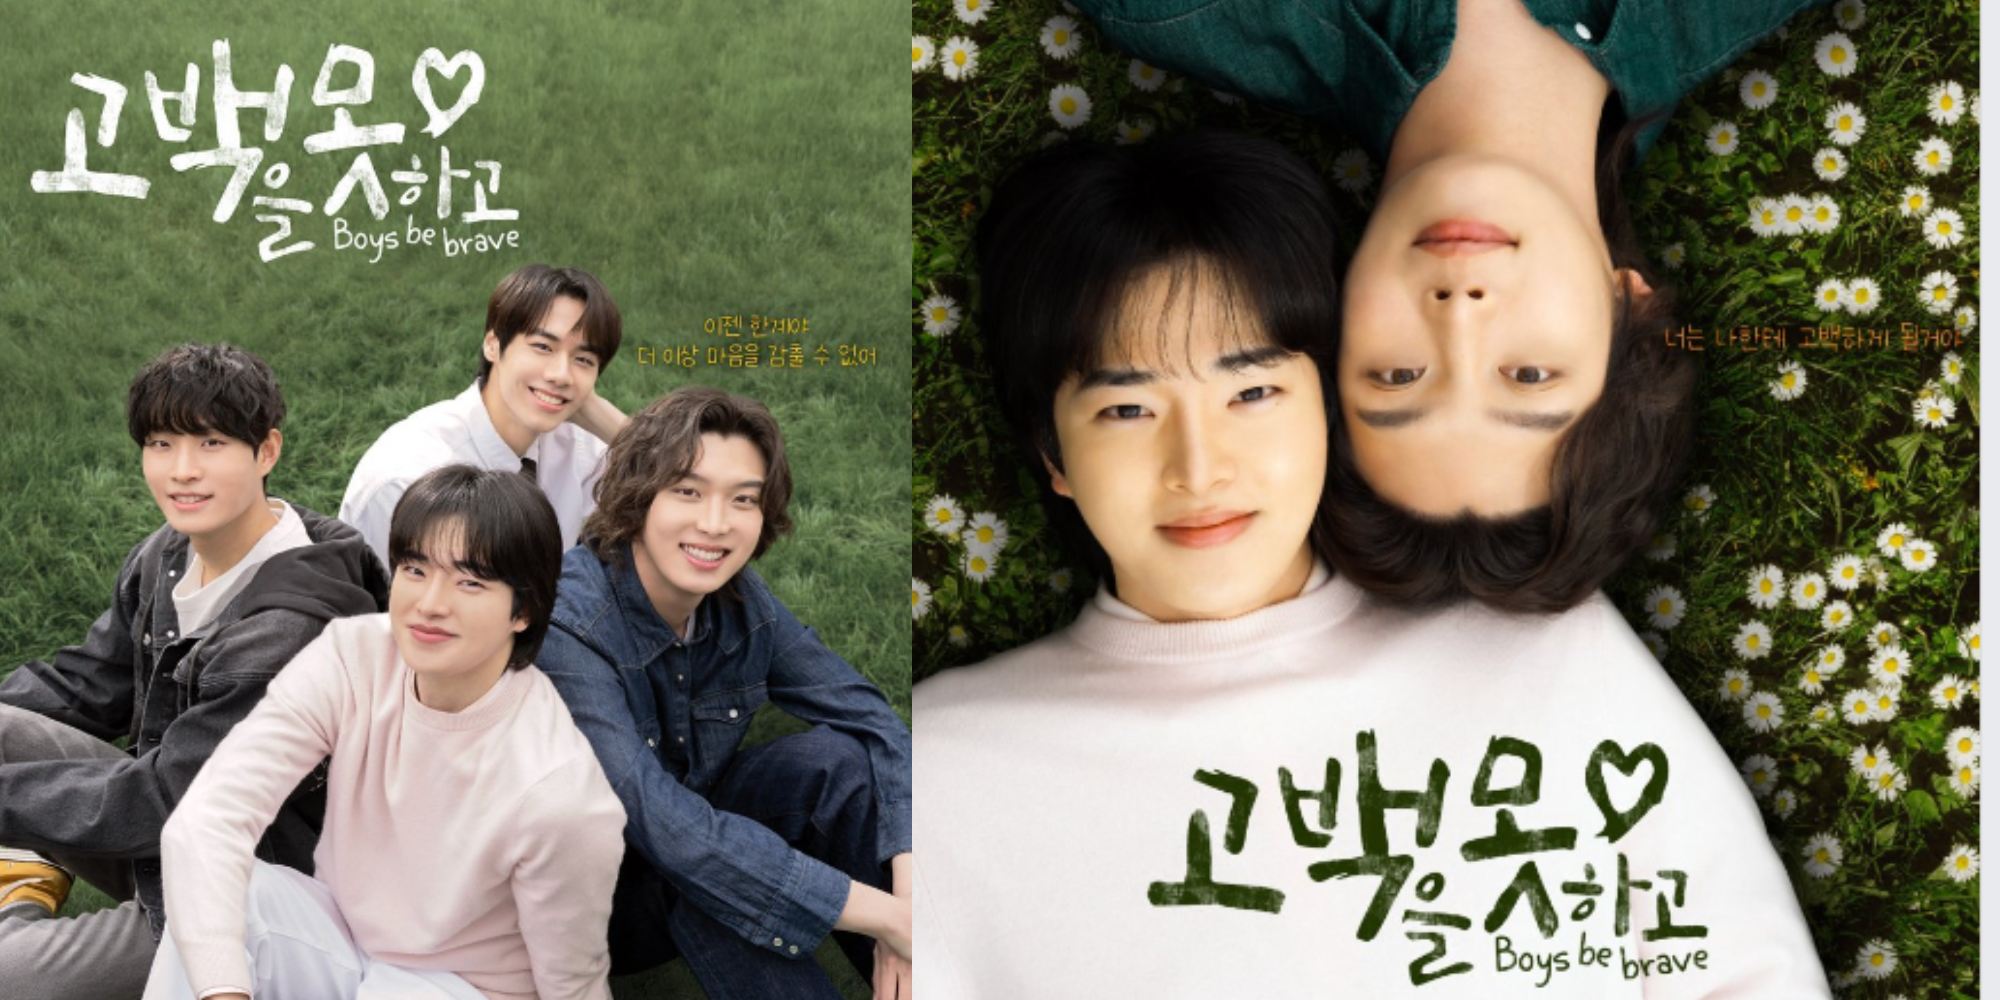 How To Watch Boys Be Brave Episodes? Streaming Guide & Schedule